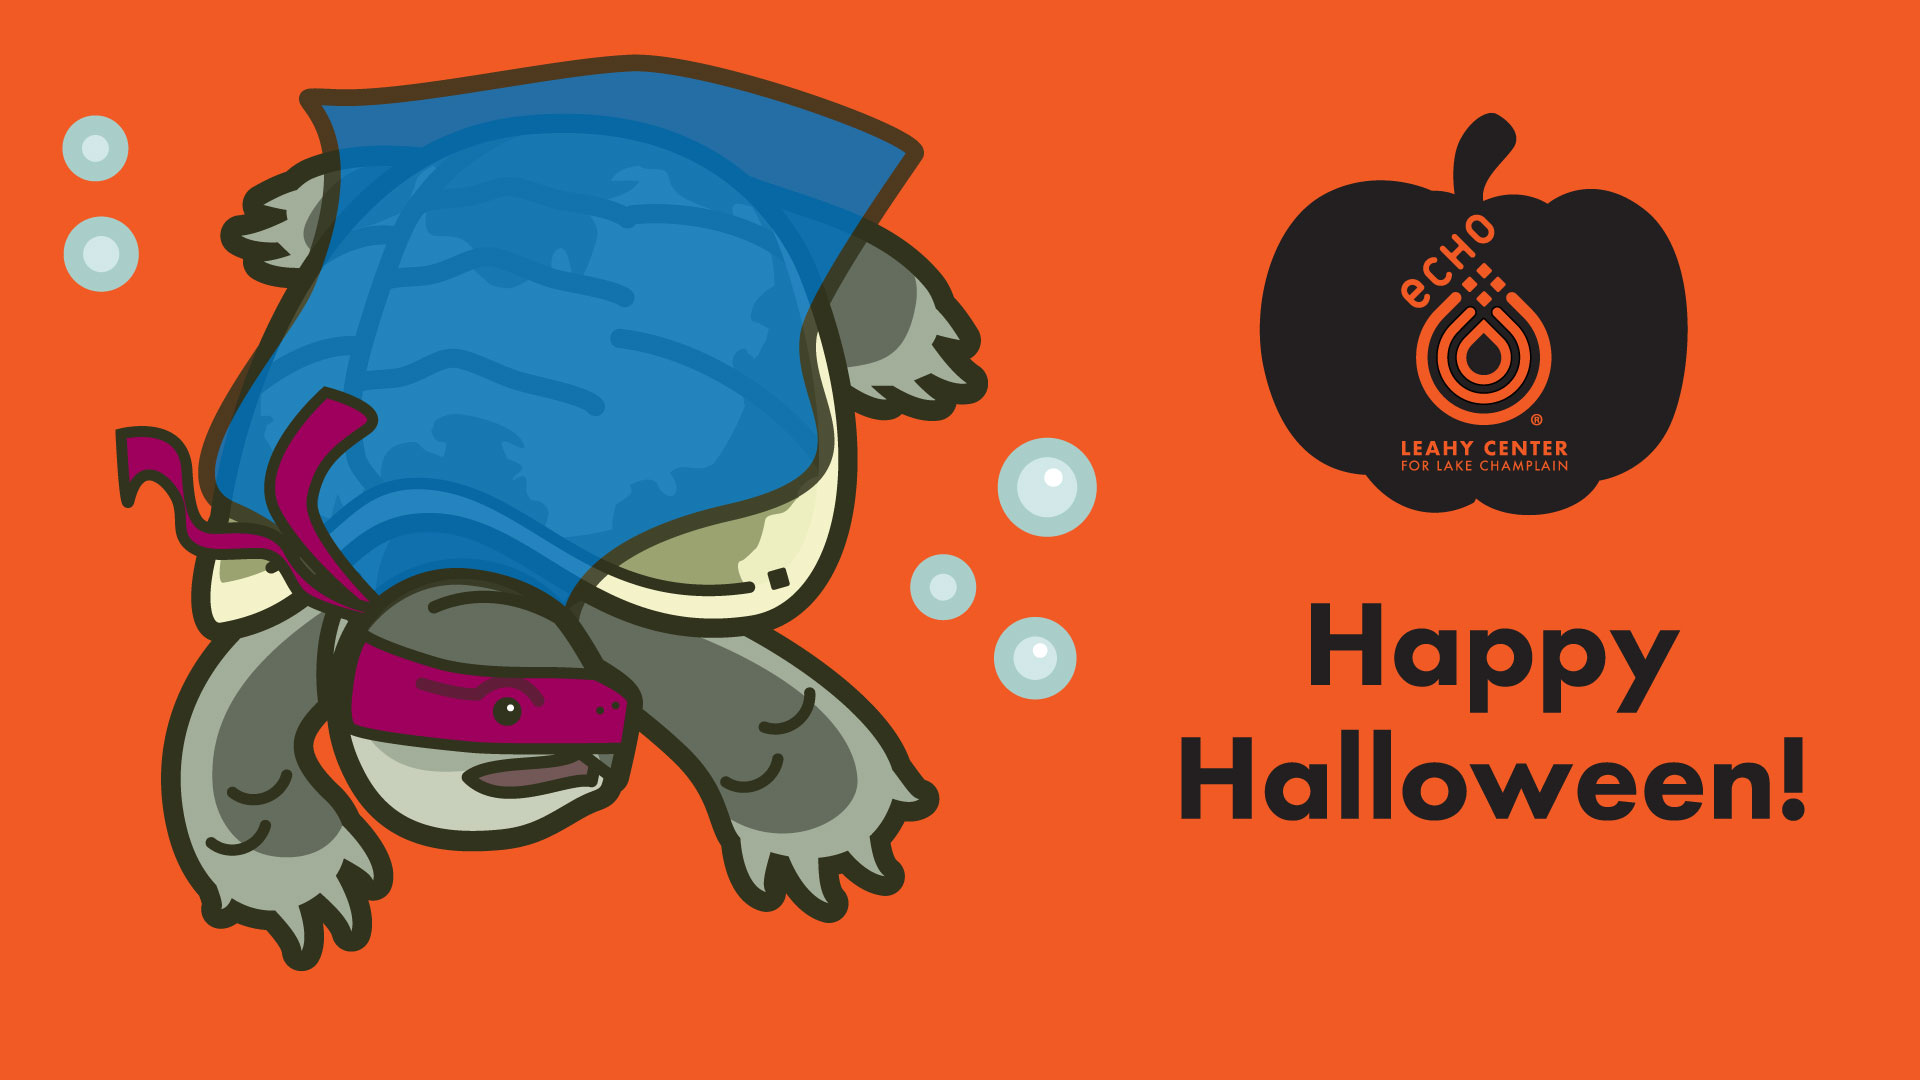 An illustration of snapping turtle with costume on--mask and blue cape--with the words "Happy Halloween" and ECHO logo.